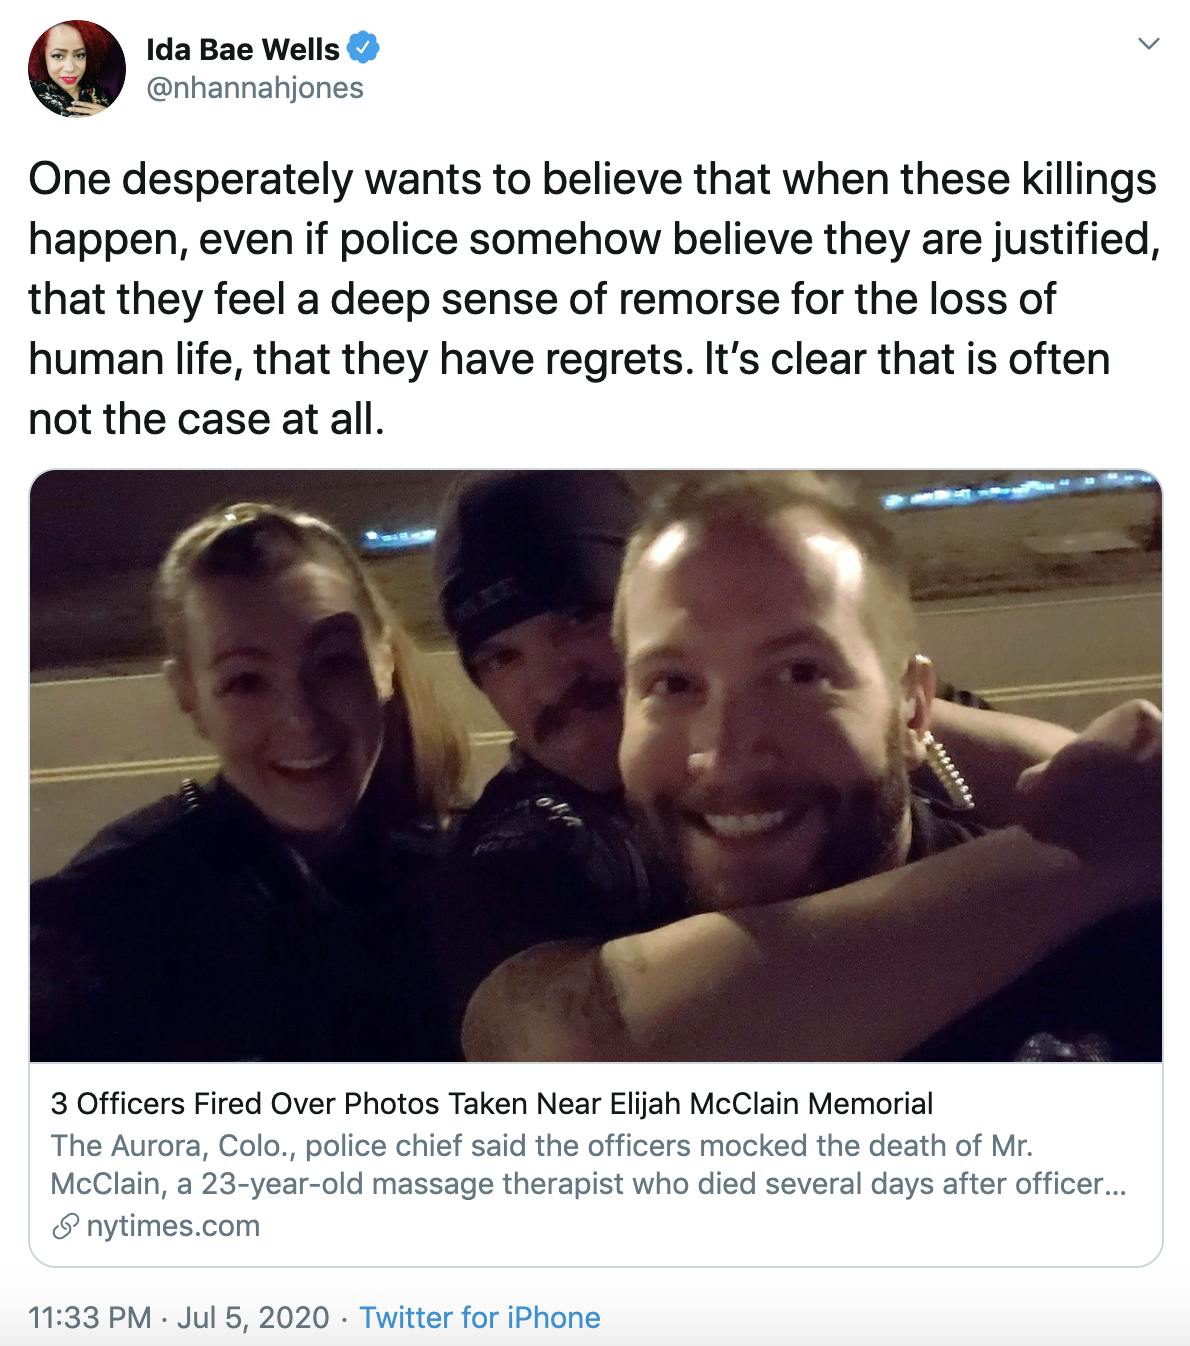 One desperately wants to believe that when these killings happen, even if police somehow believe they are justified, that they feel a deep sense of remorse for the loss of human life, that they have regrets. It’s clear that is often not the case at all.